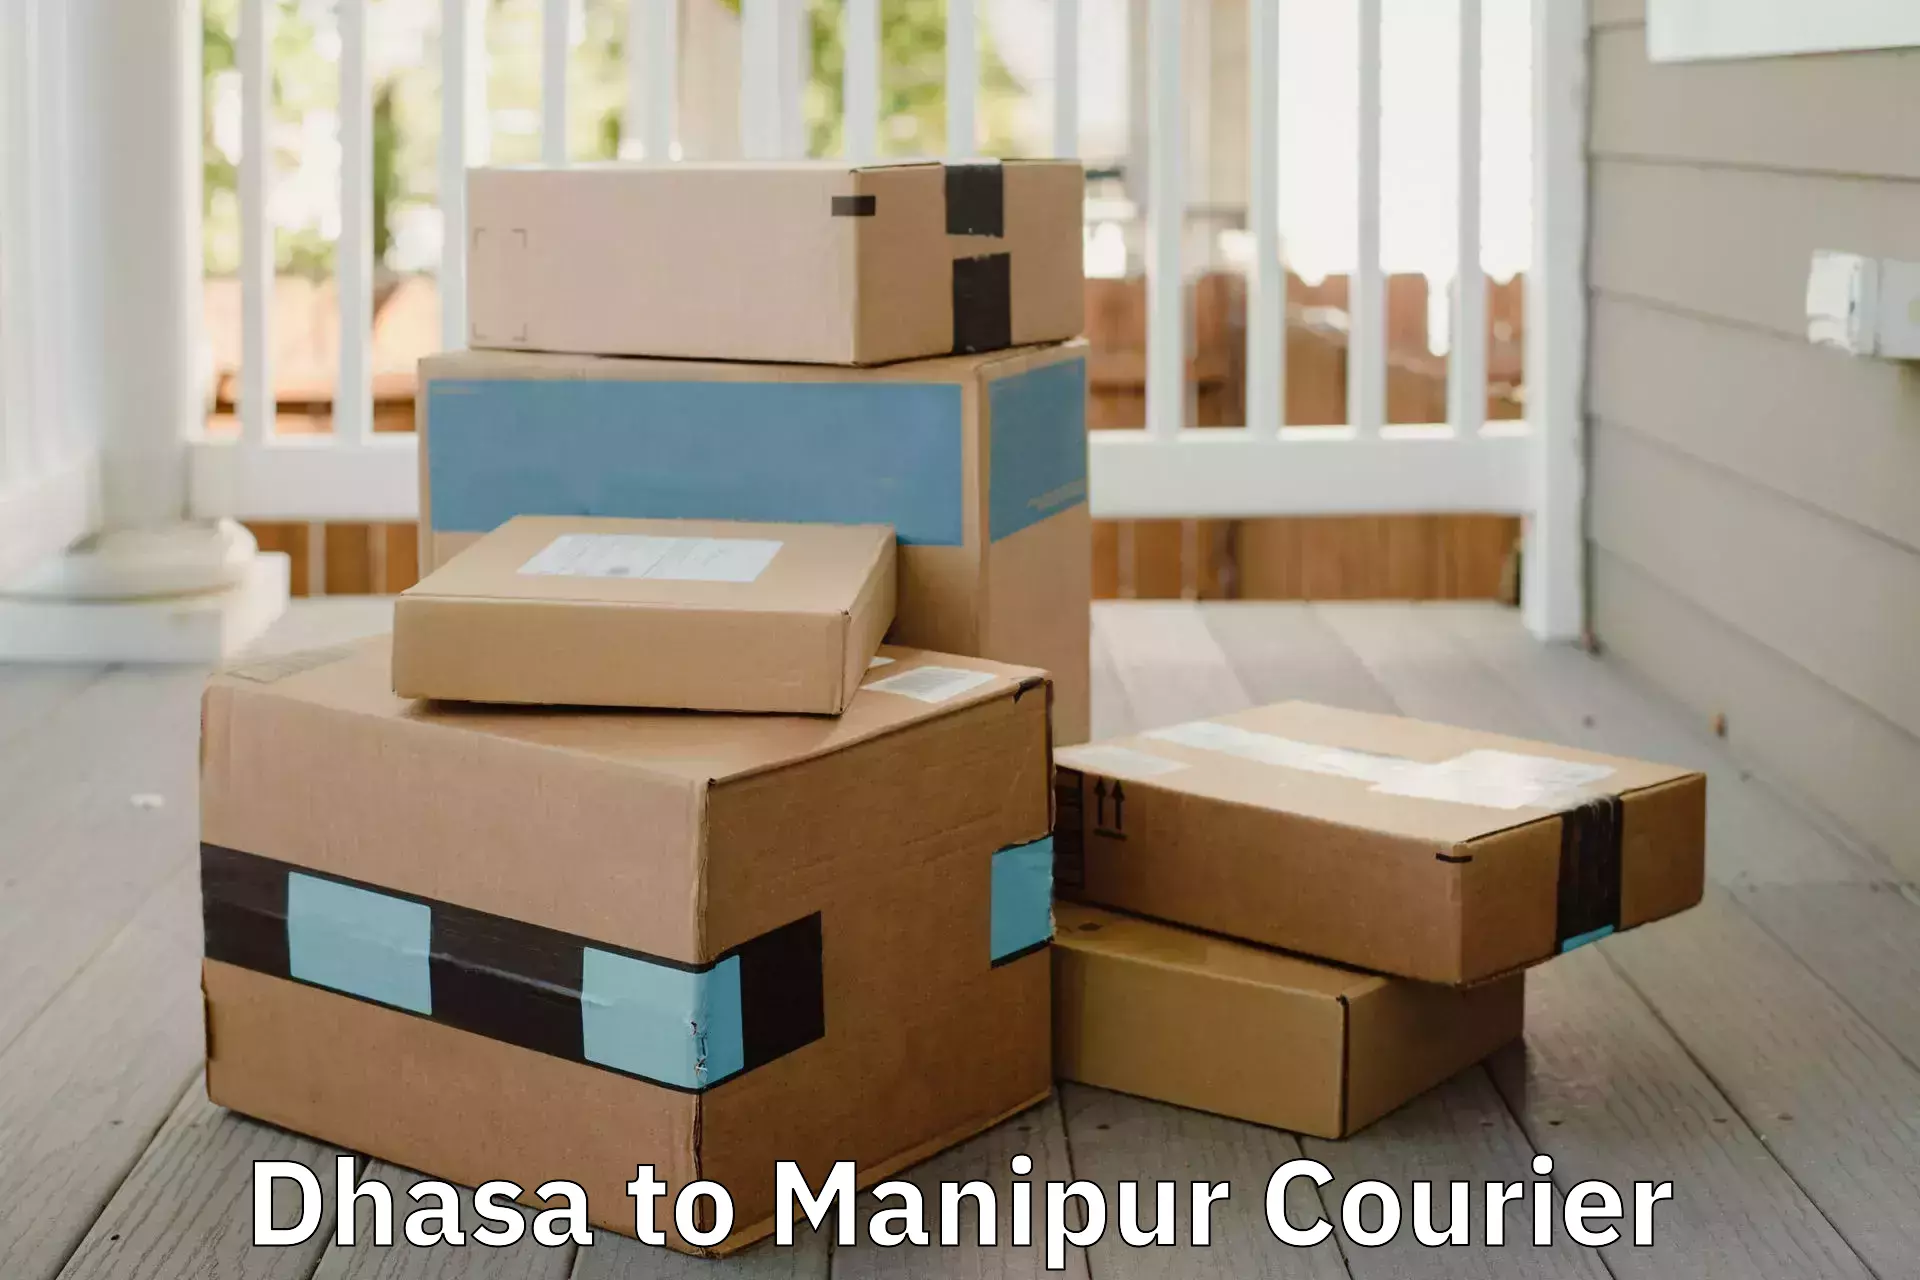 Trusted moving company Dhasa to Manipur